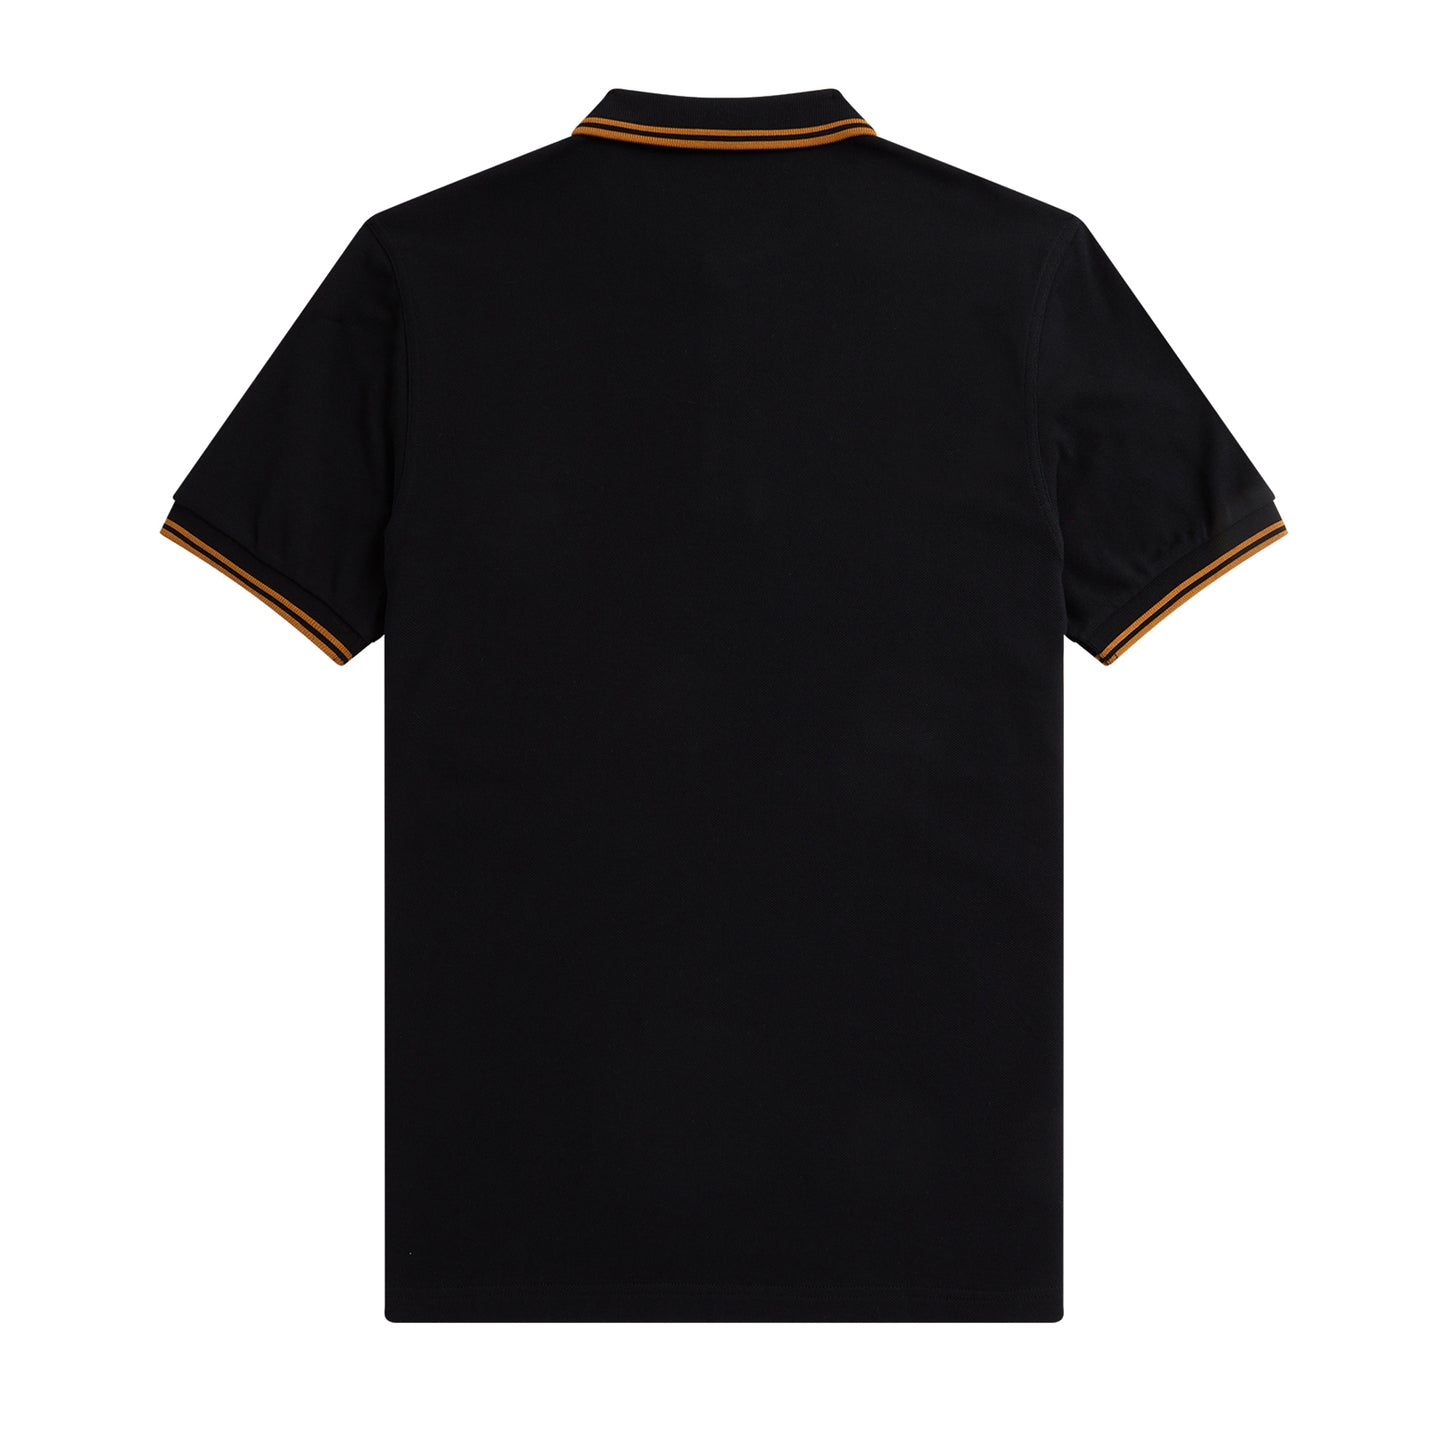 Fred Perry Twin Tipped Fred Perry Shirt Black/Dark Caramel Foto de trás.